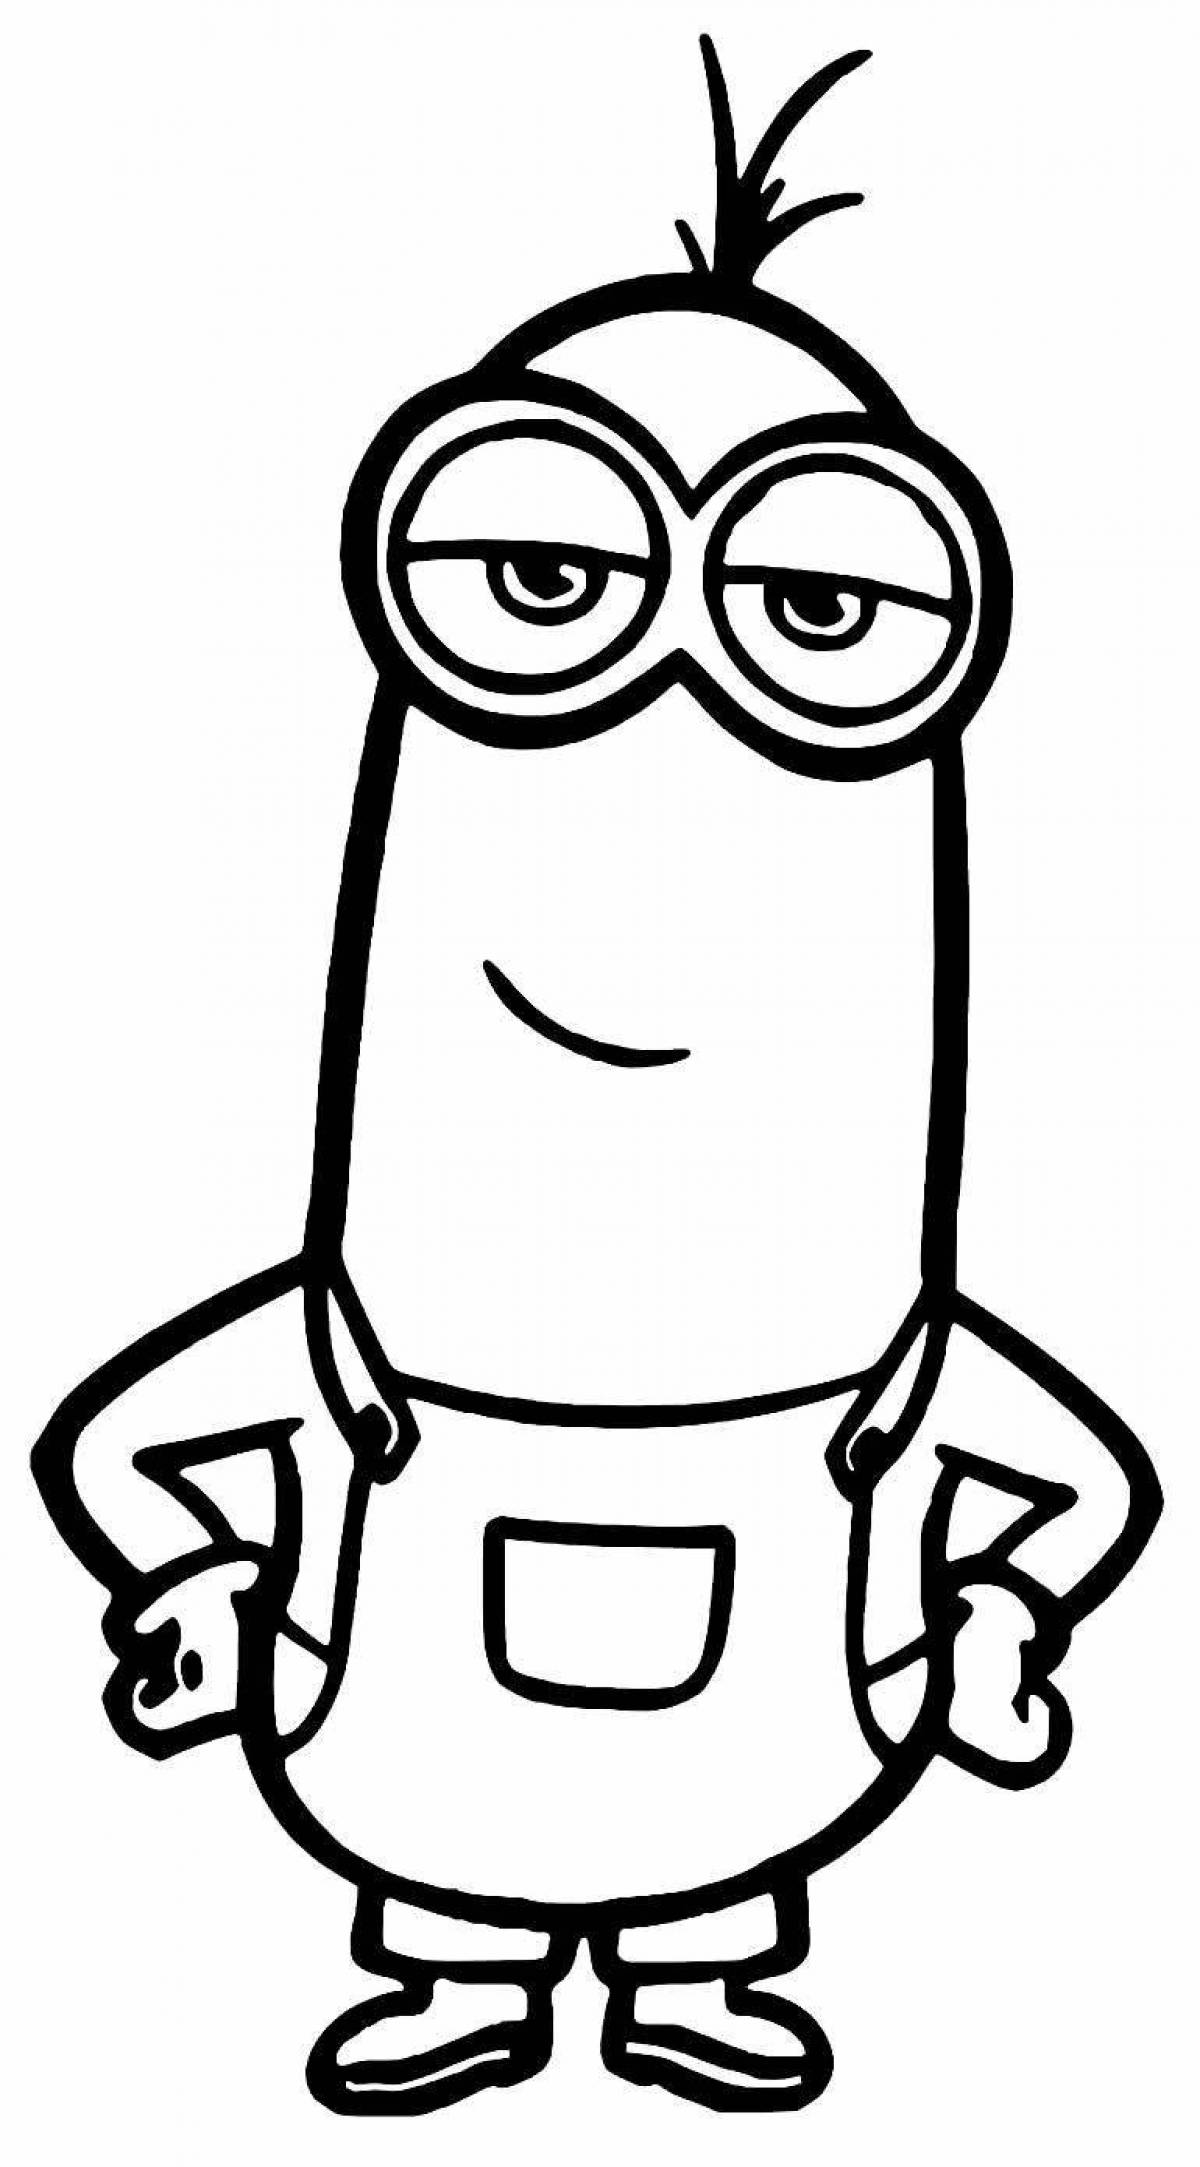 Coloring the amazing kevin the minion